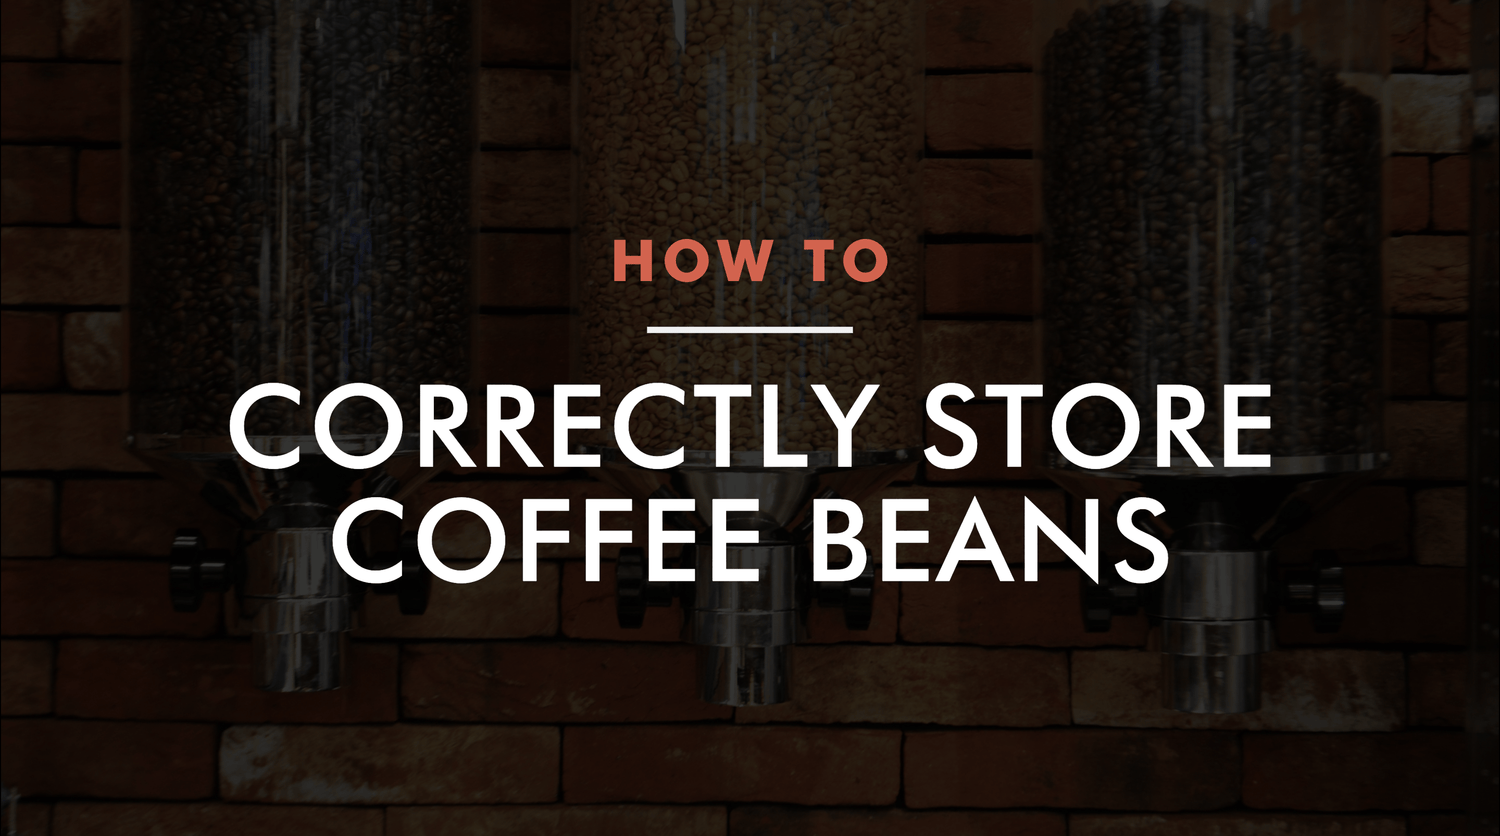 How To Correctly Store Coffee Beans